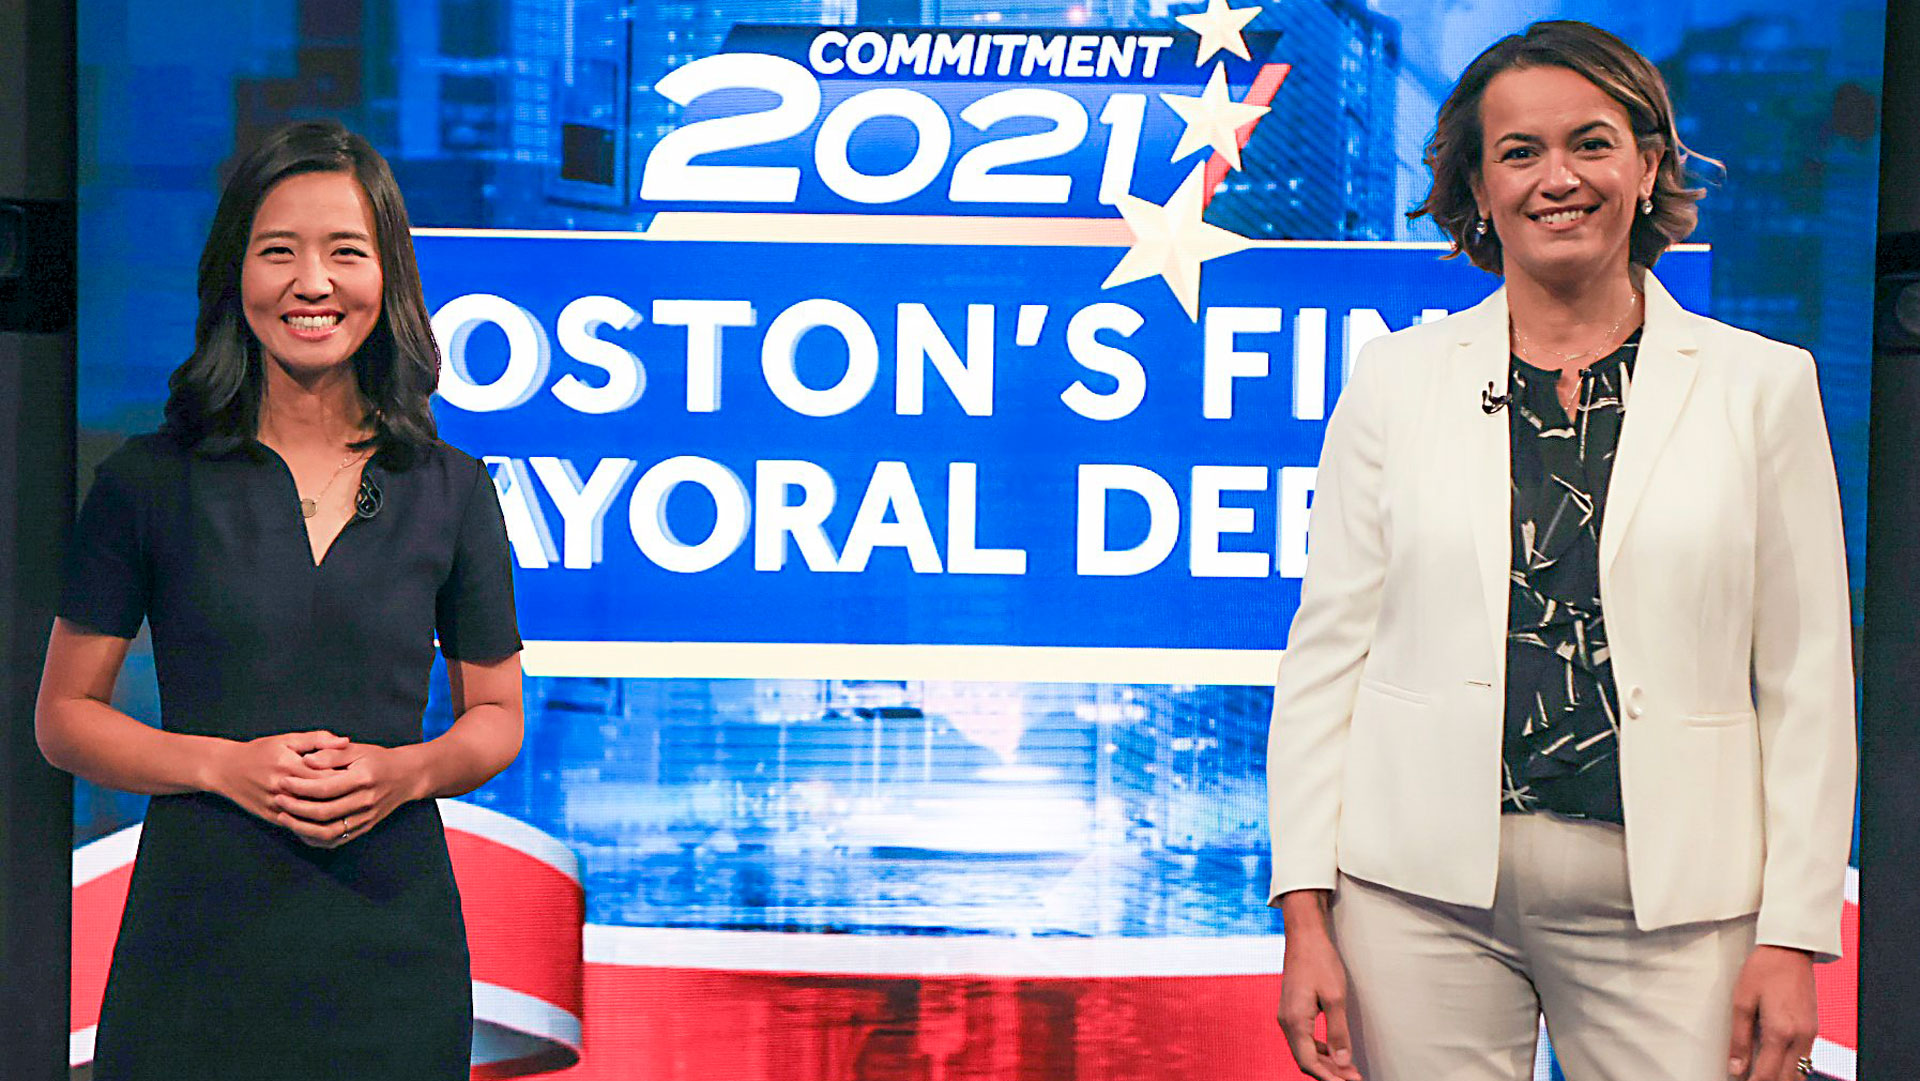 Boston to elect woman as mayor for the first time